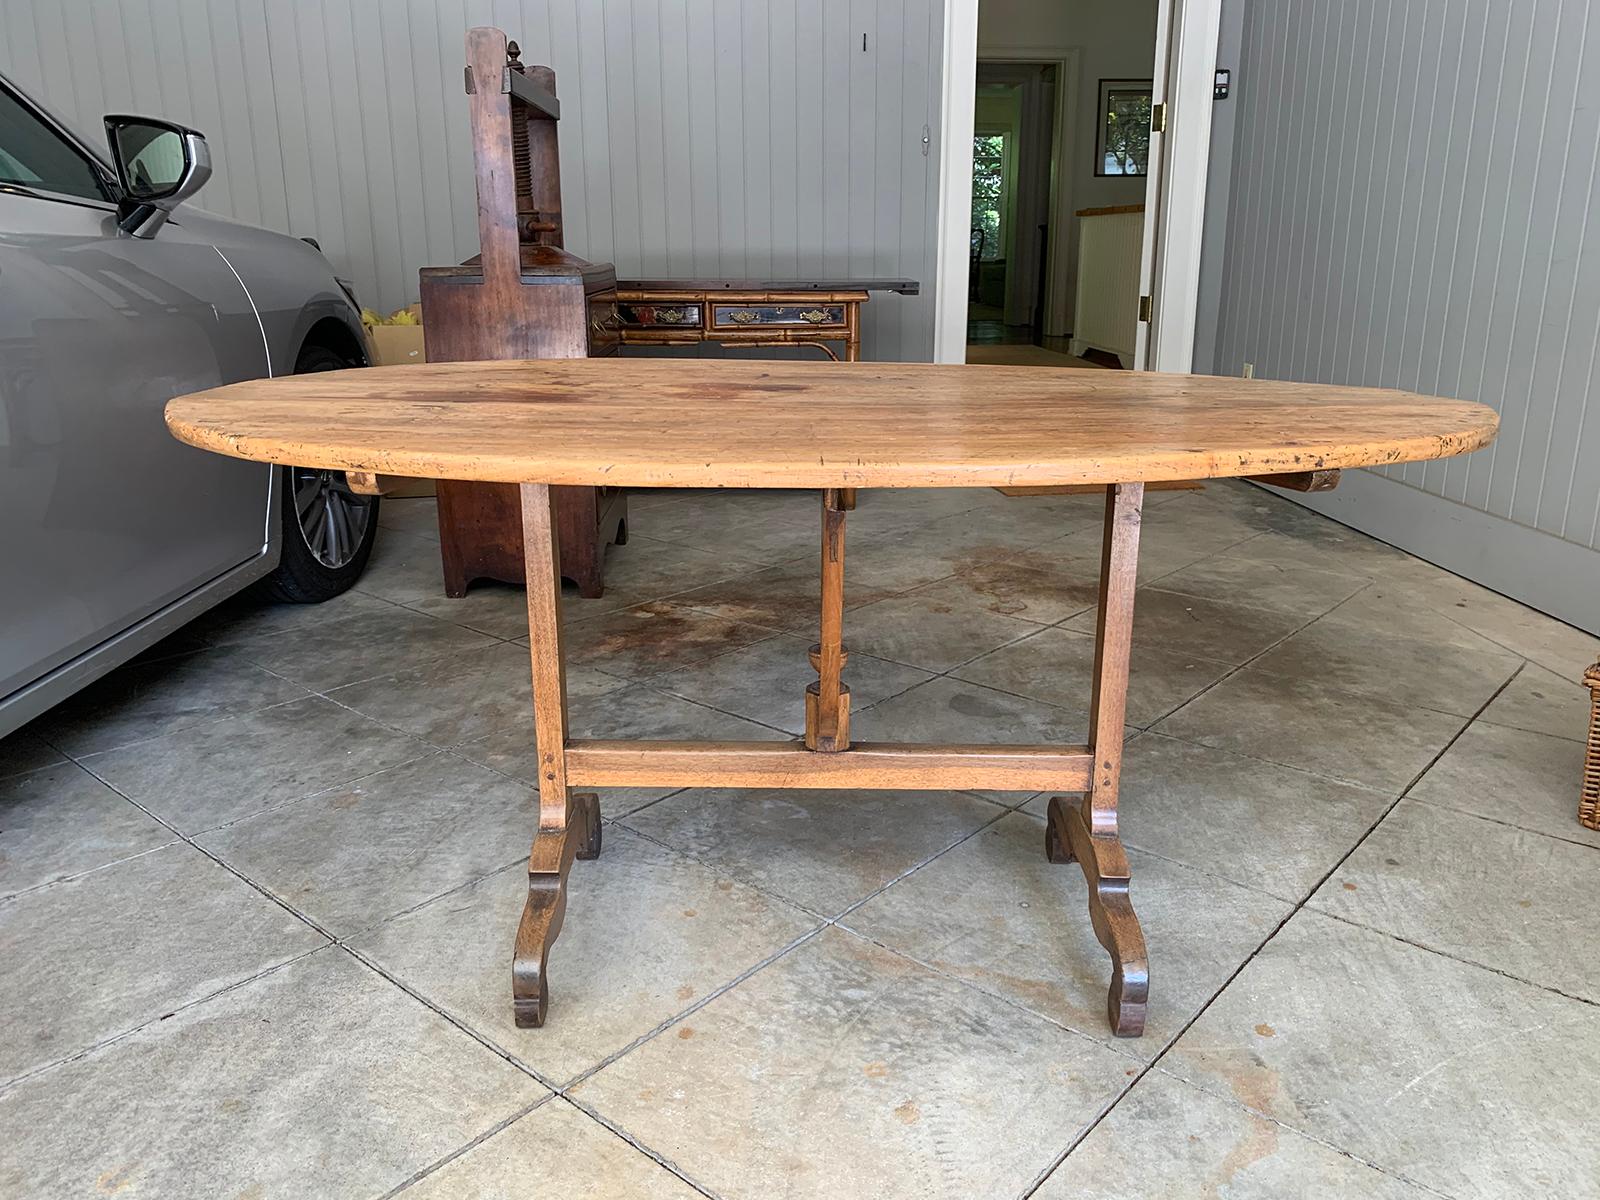 Mid-19th century French rustic oval wine tasting table with trestle base
Apron: 27